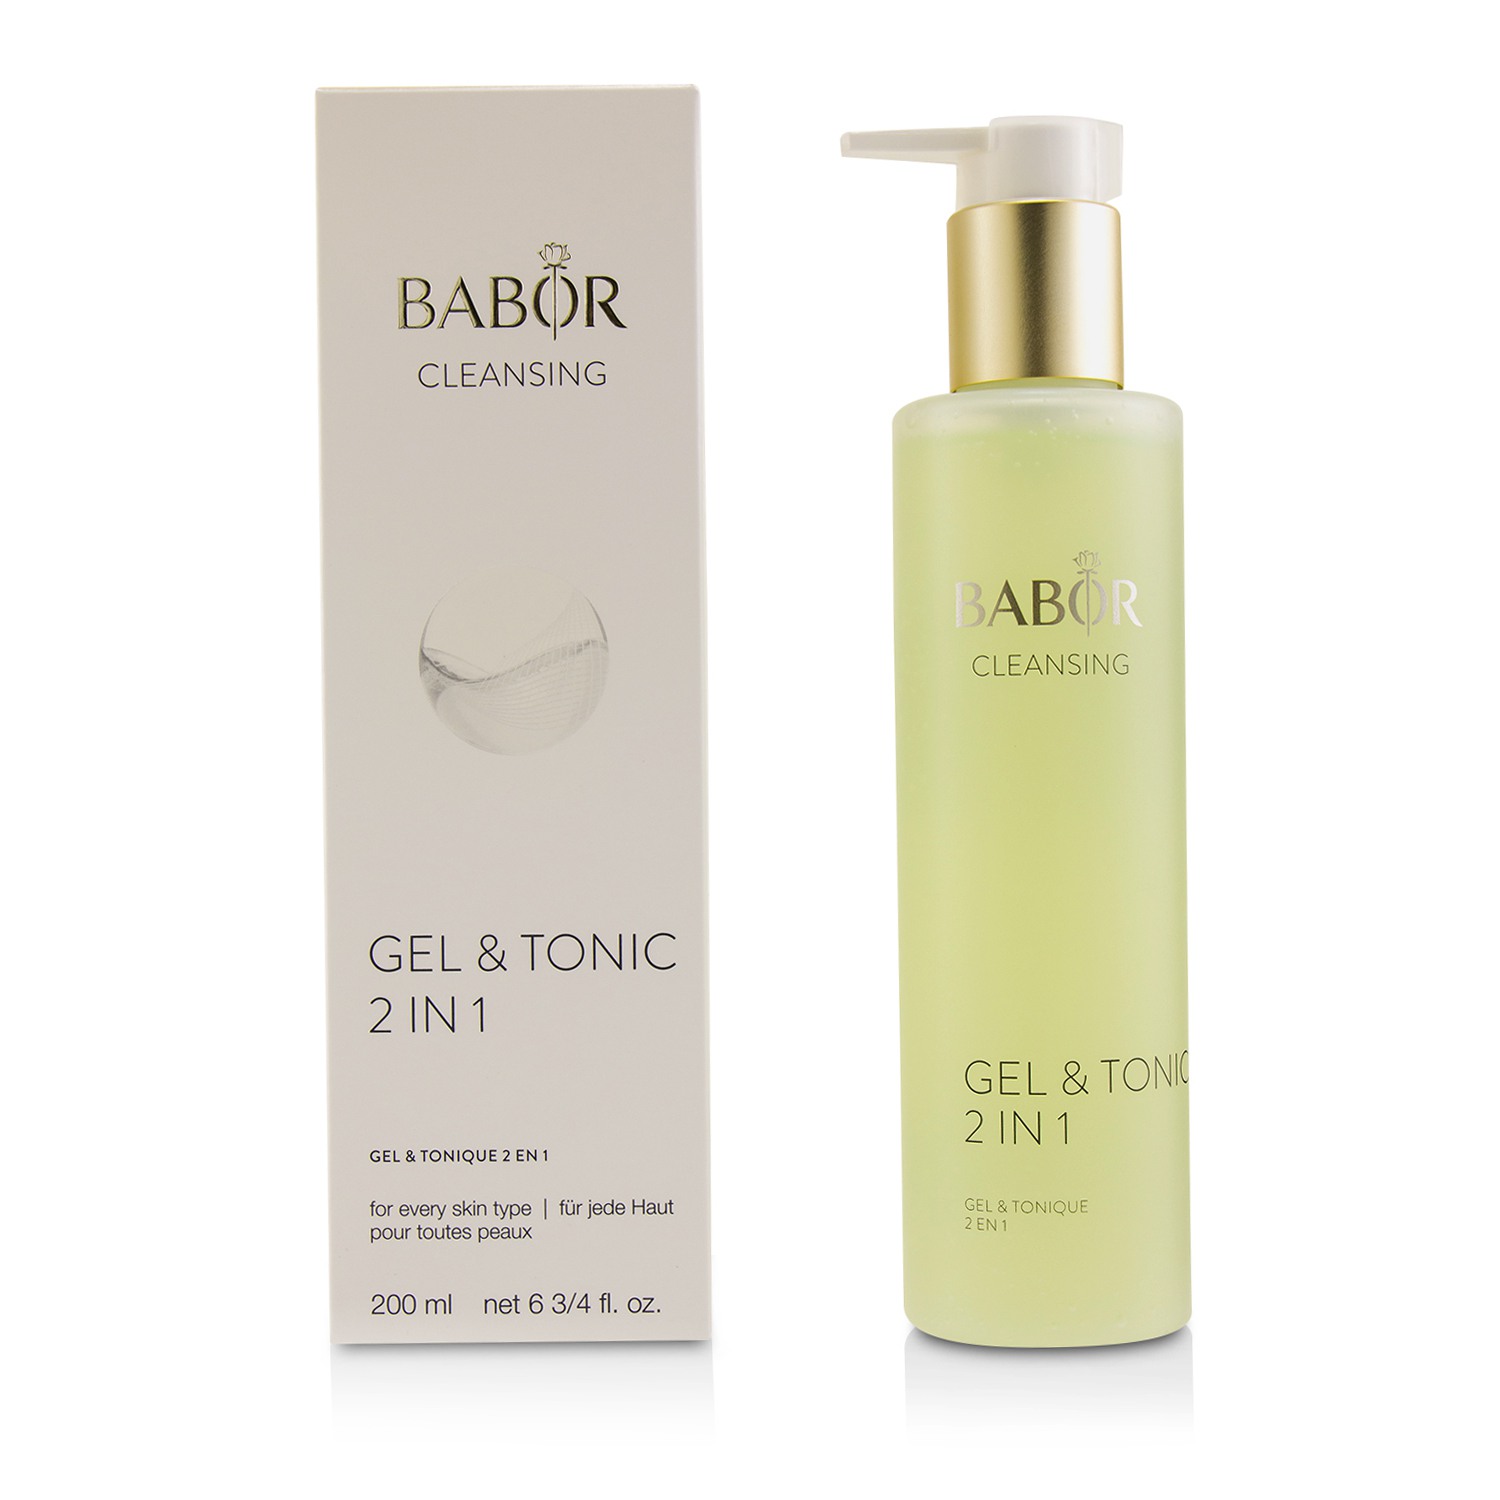 CLEANSING Gel & Tonic 2 In 1 Babor Image